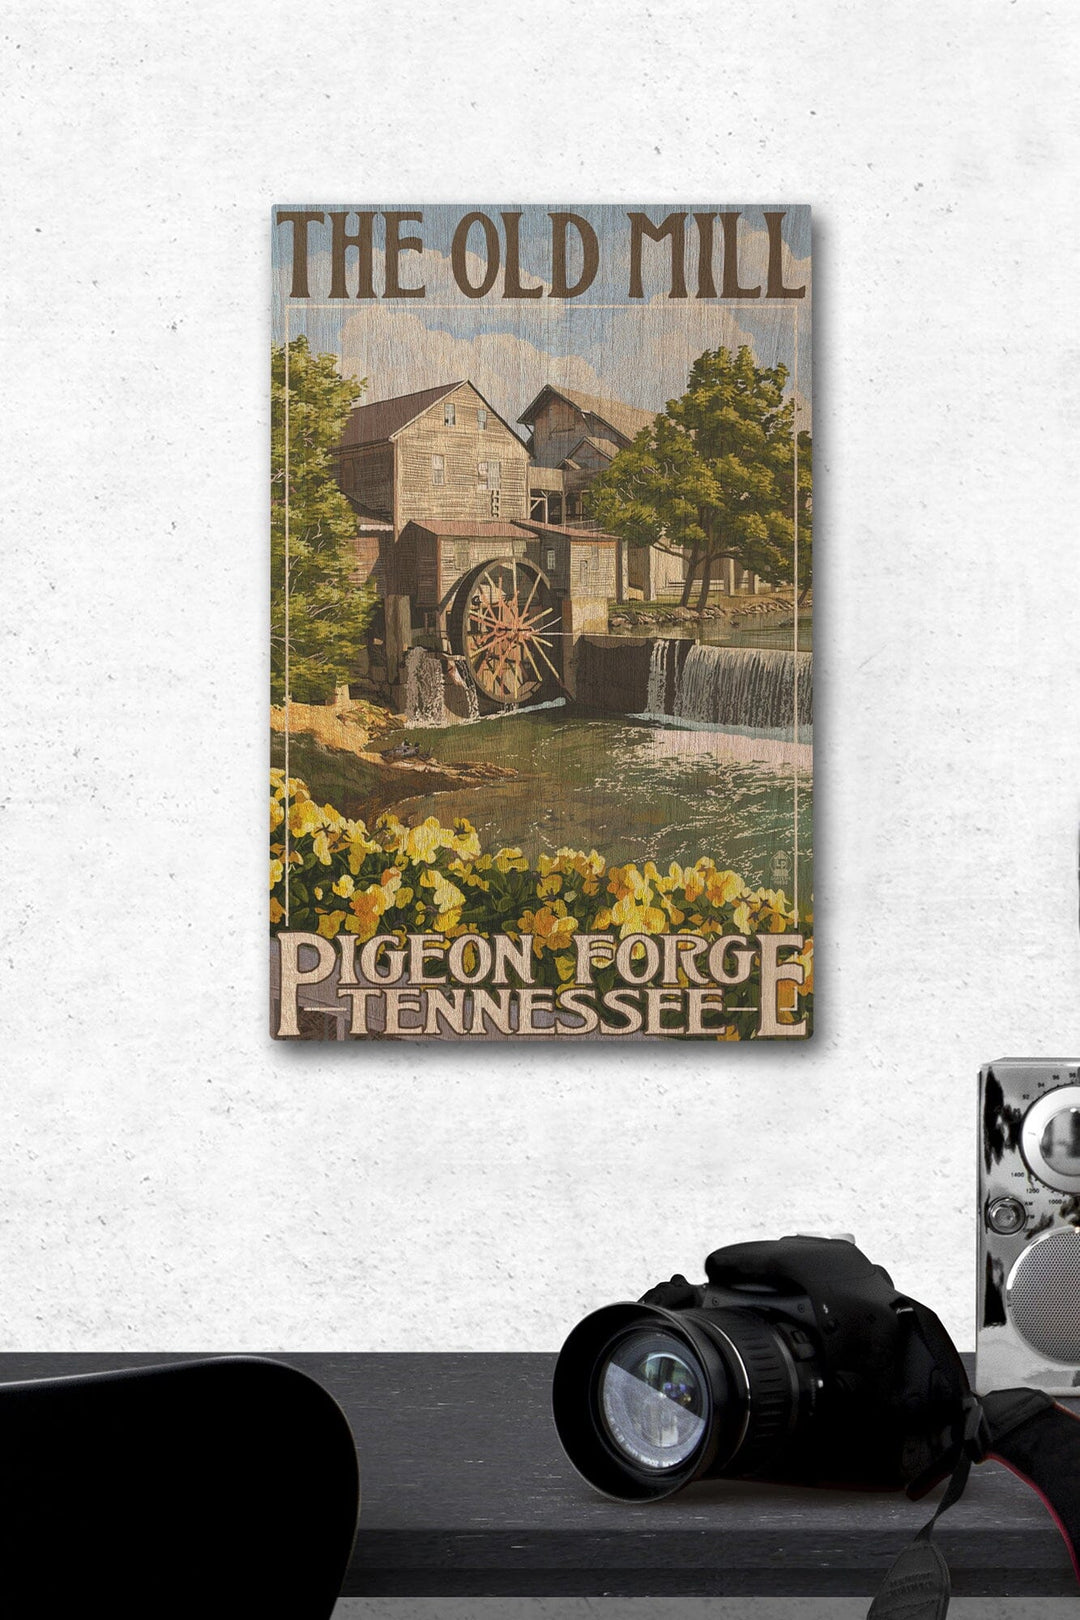 Pigeon Forge, Tennesseee, The Old Mill, Lantern Press Artwork, Wood Signs and Postcards Wood Lantern Press 12 x 18 Wood Gallery Print 